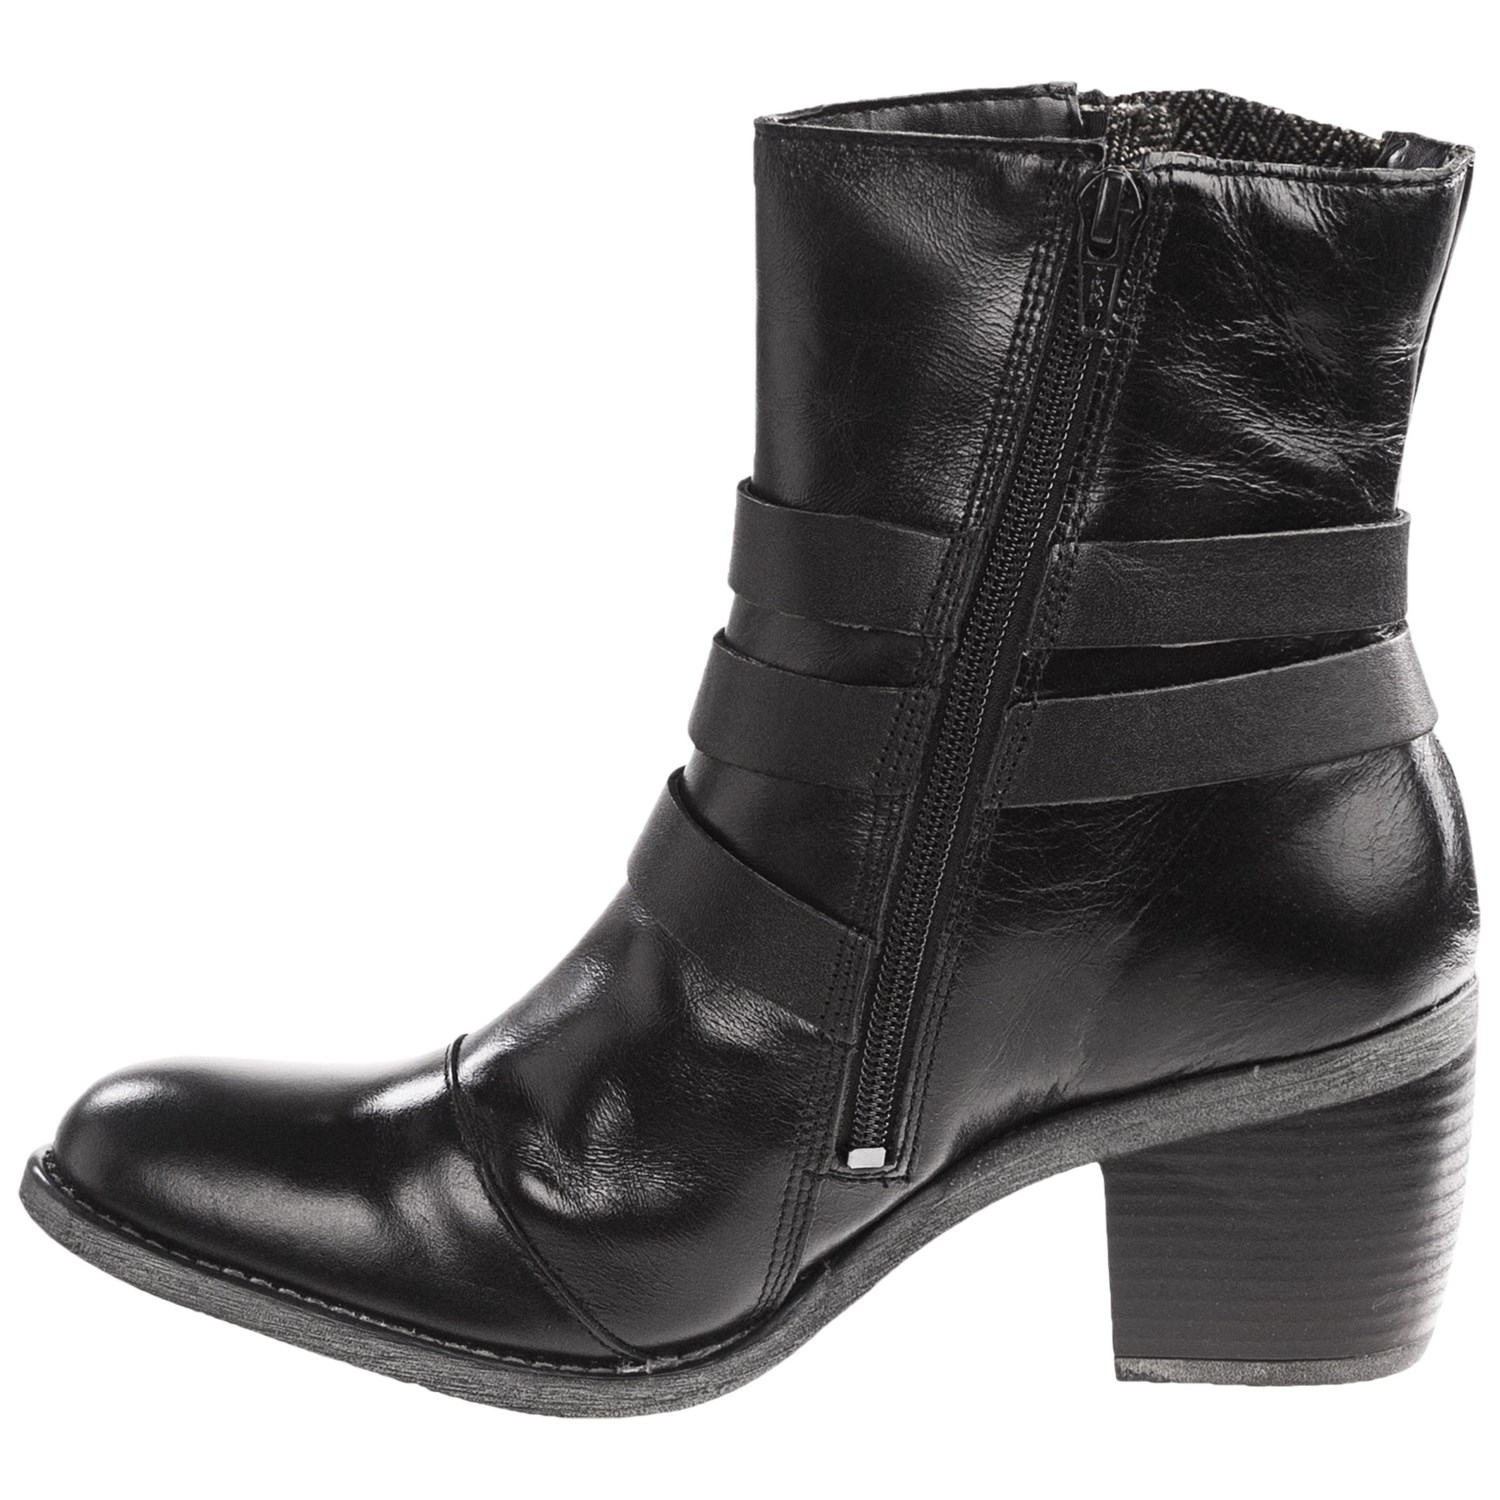 Hush Puppies Rustique Ankle Boots (For Women) 6817F - Save 40%